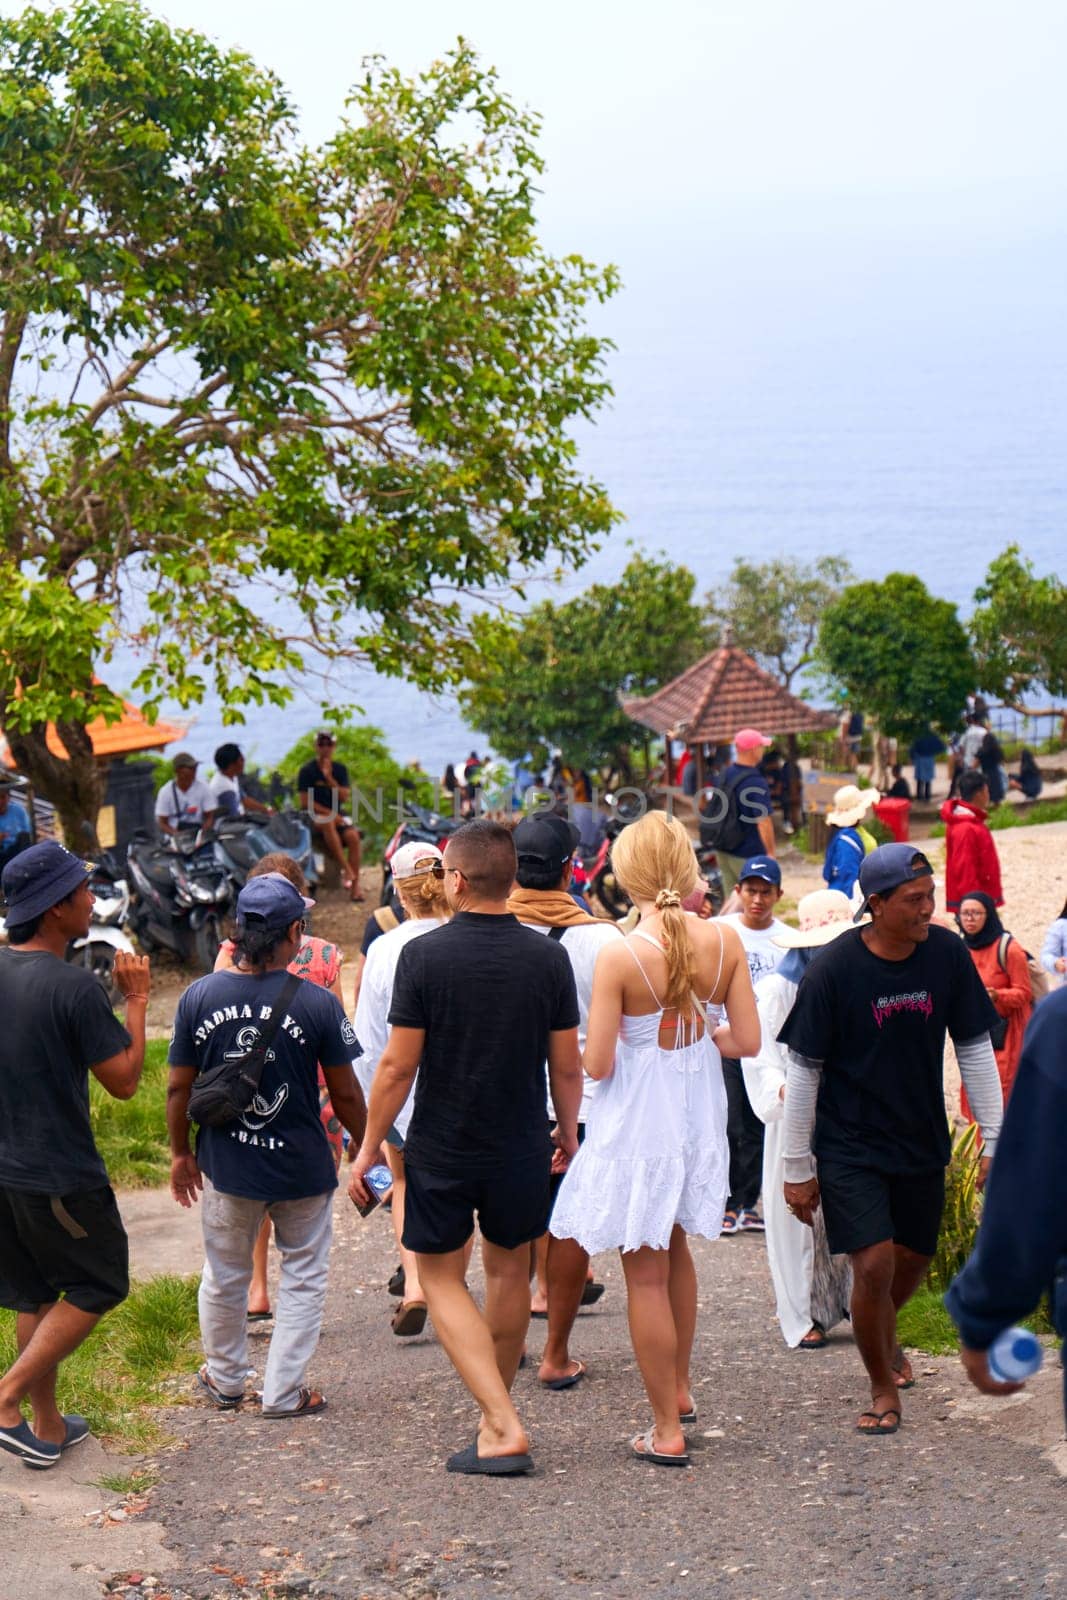 A crowd of tourists visits a popular place on an island in Indonesia. by Try_my_best